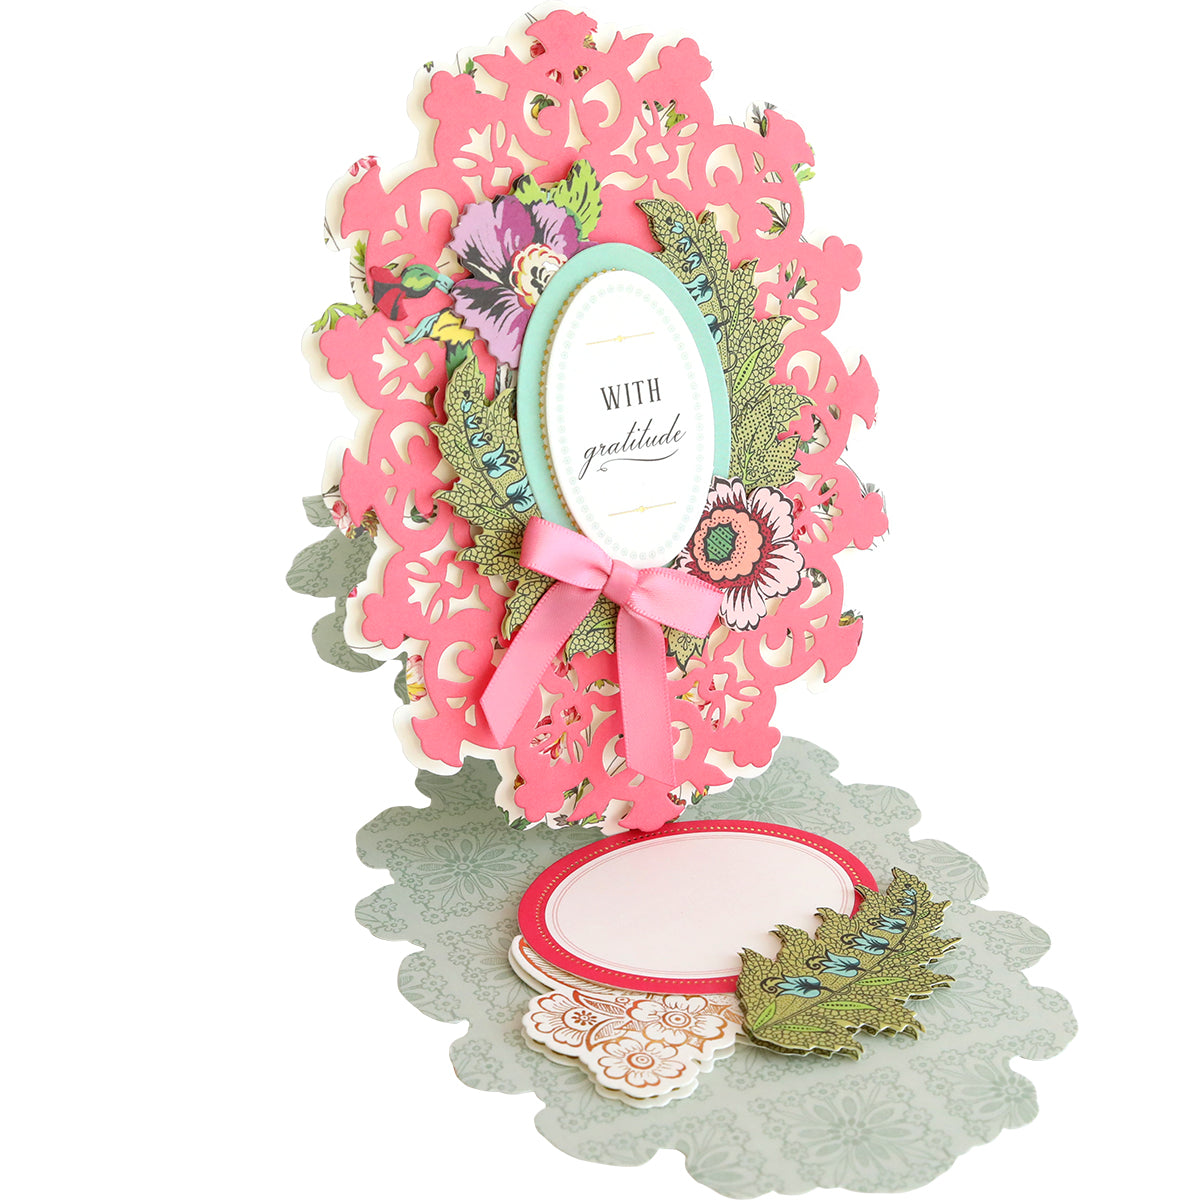 An ornate, handmade three-dimensional Simply Thankful Easel Card Making Kit with a "Thankful" message, adorned with floral patterns and a pink ribbon, casting a shadow on a white surface.